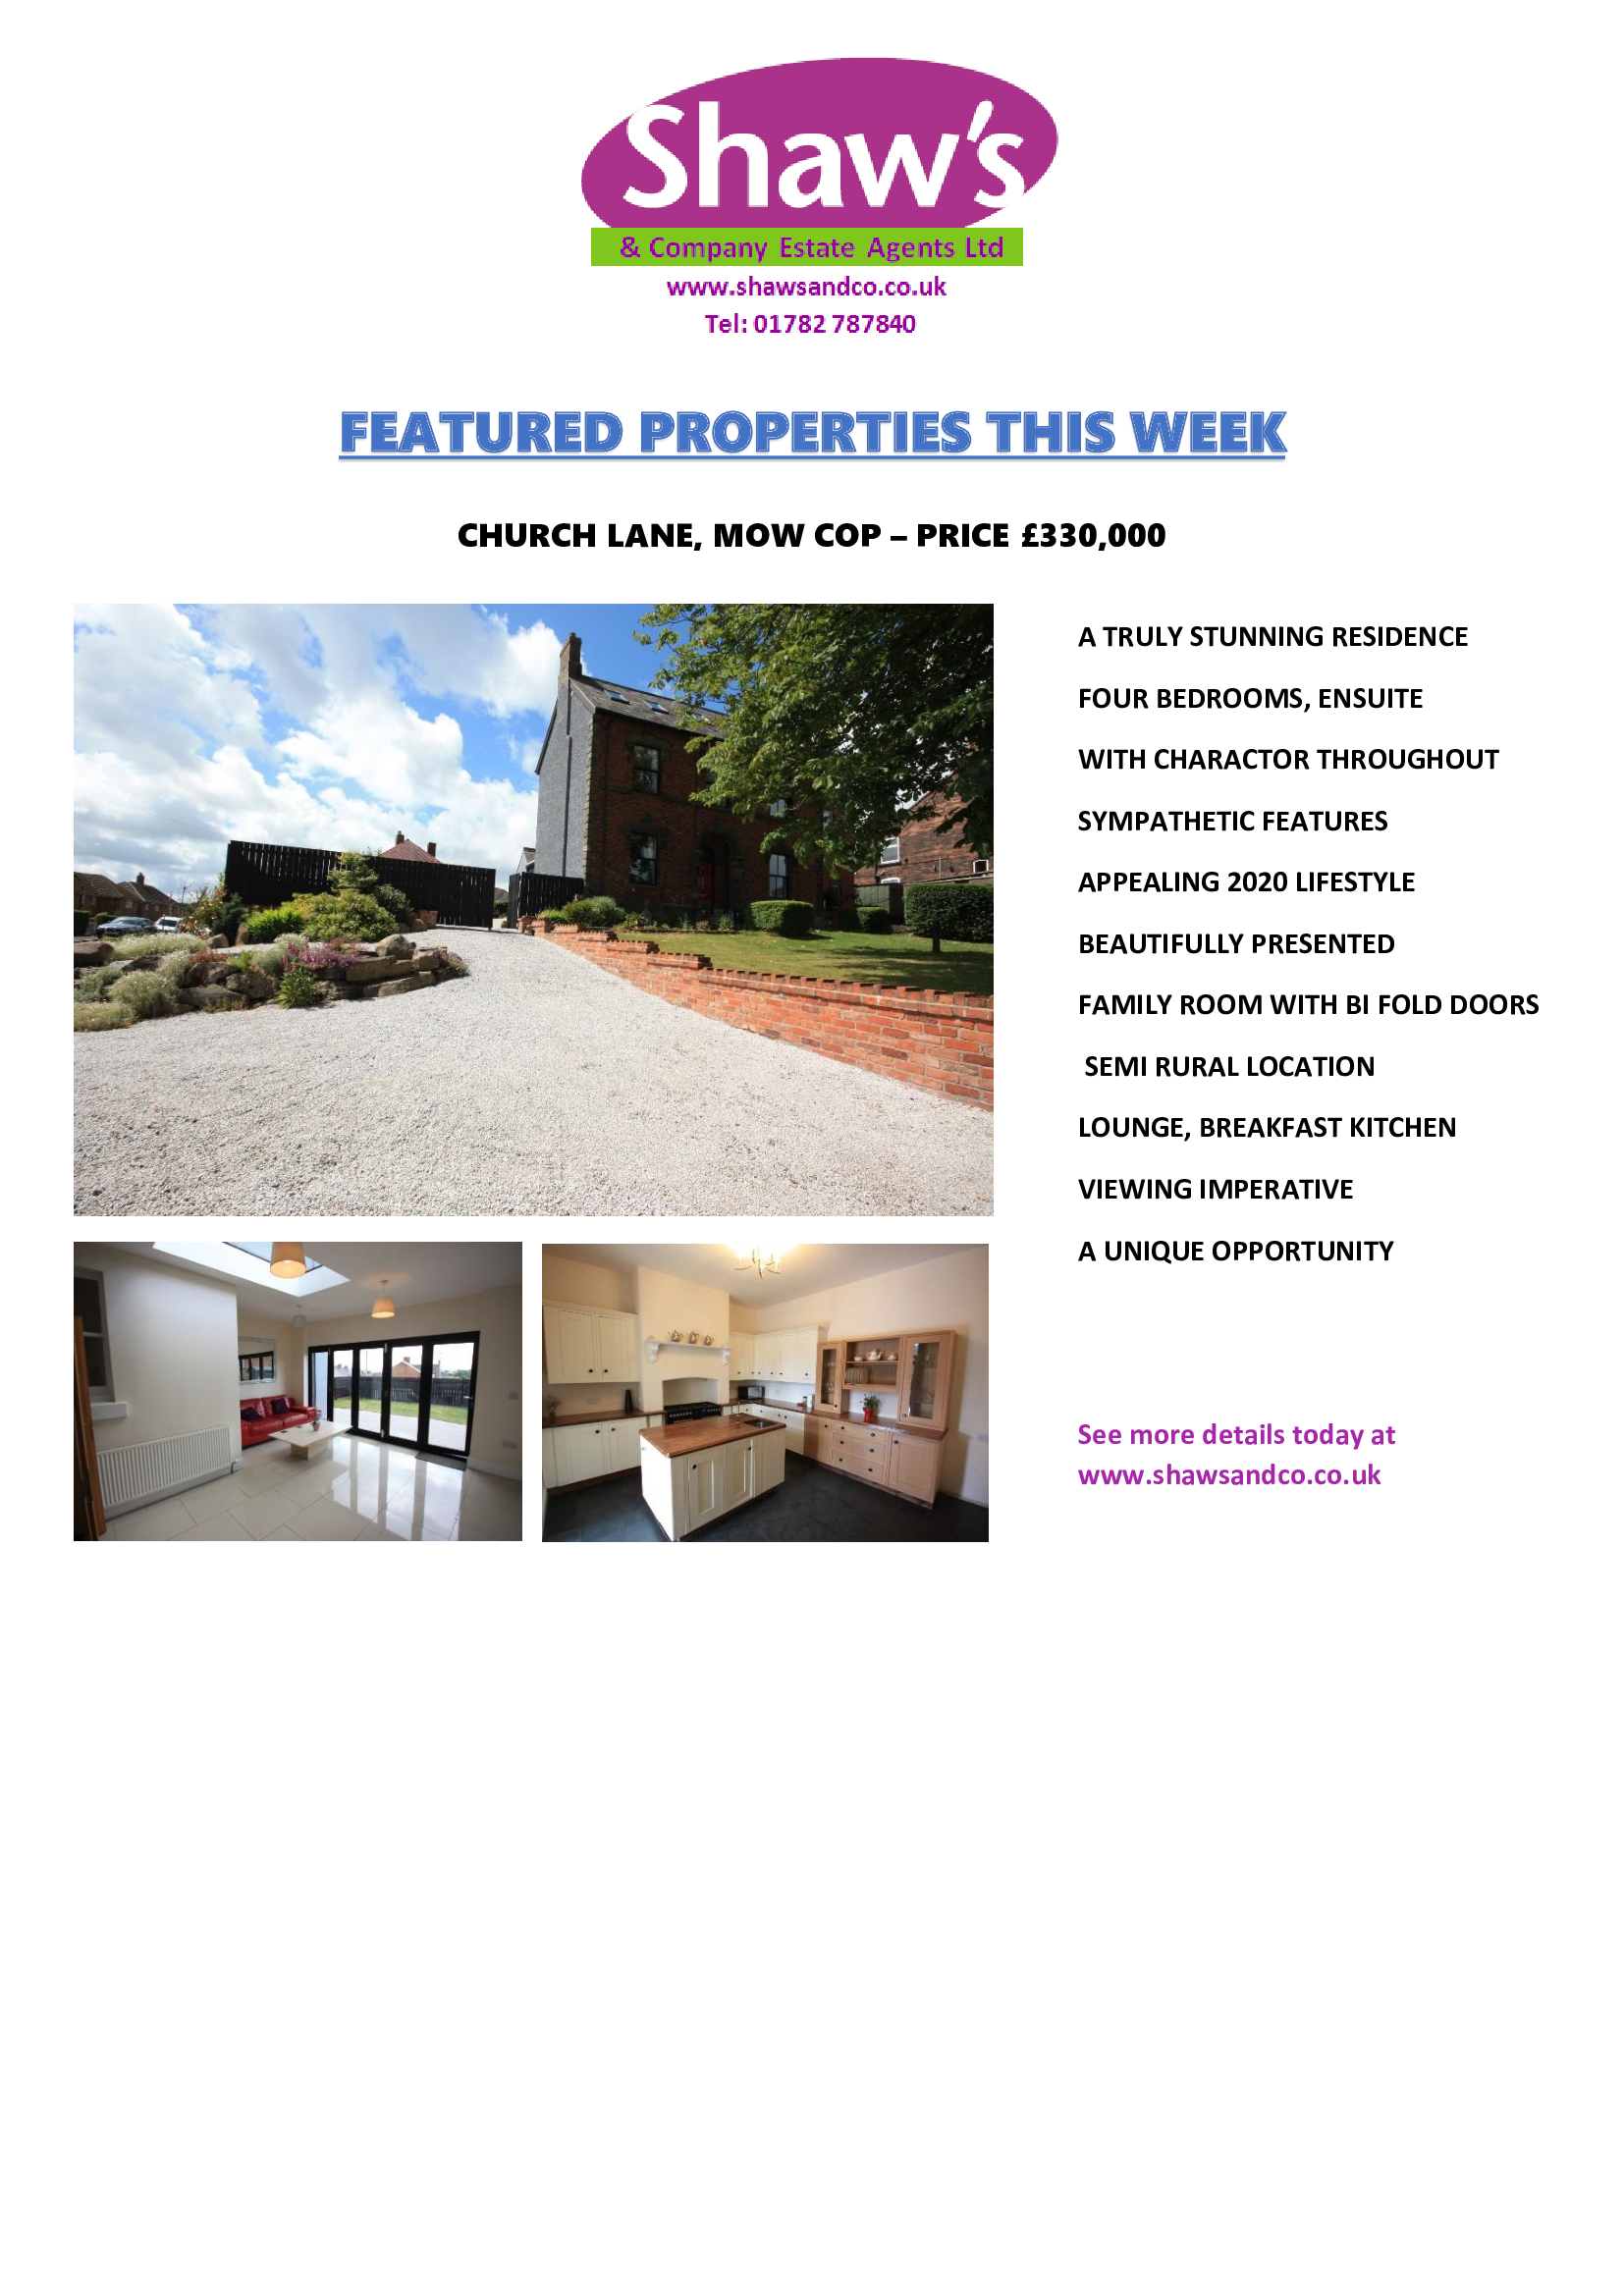 FEATURED PROPERTIES OF THE WEEK - DOUBLE EDITION!